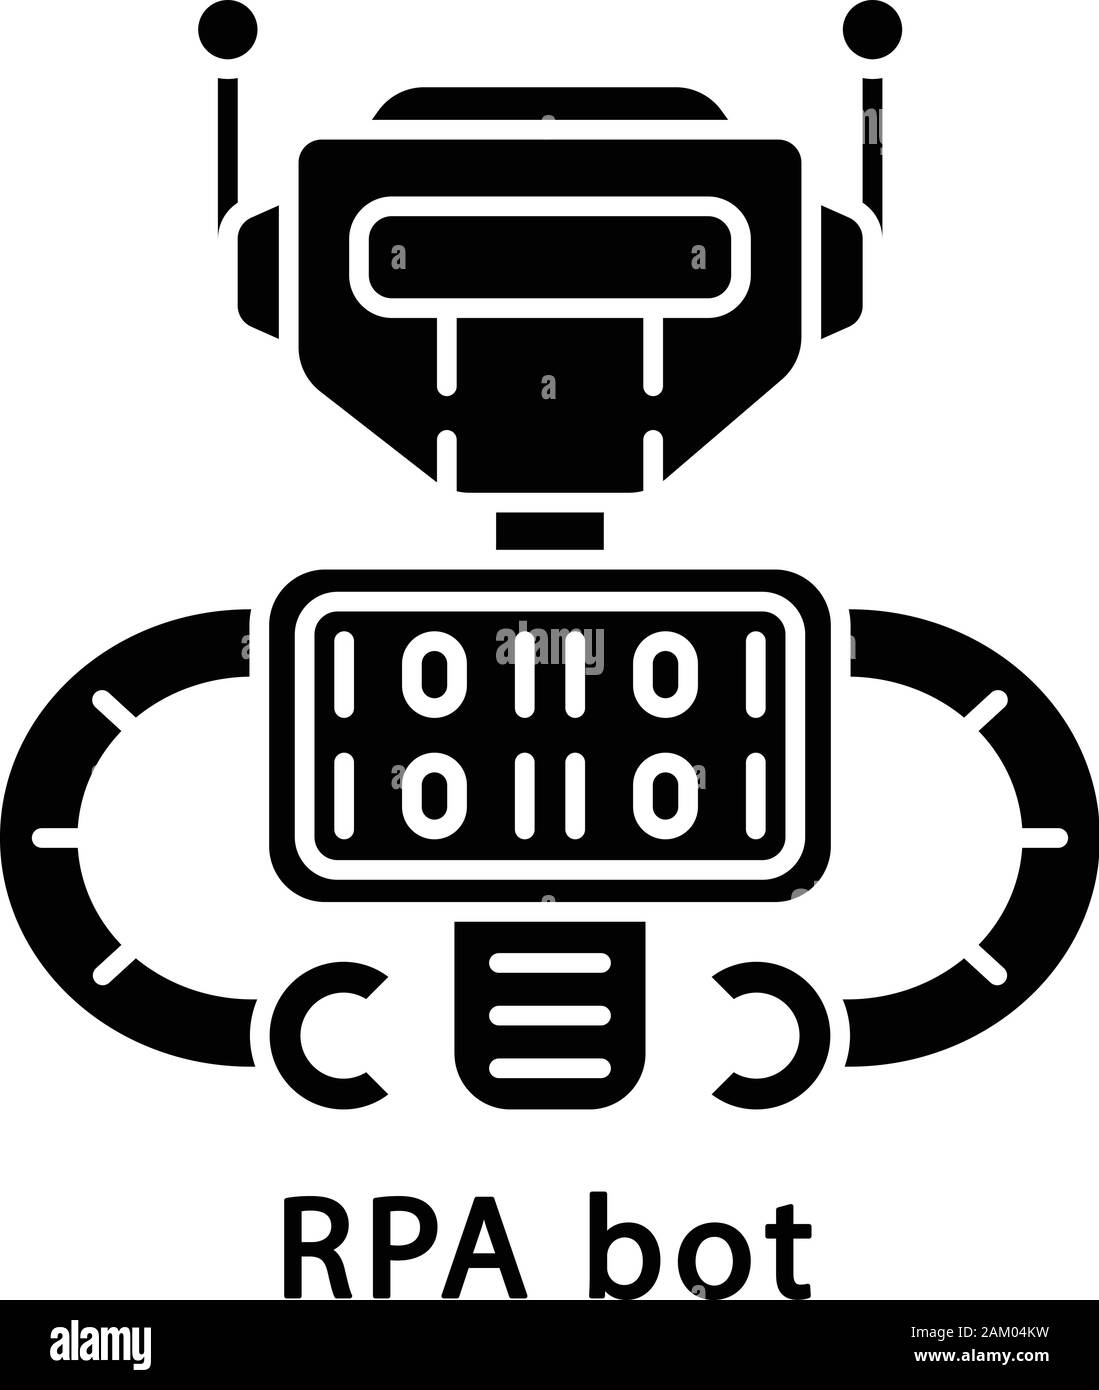 RPA bot glyph icon. Programmed cyborg. Software robot. Robotic process automation. Silhouette symbol. Negative space. Vector isolated illustration Stock Vector